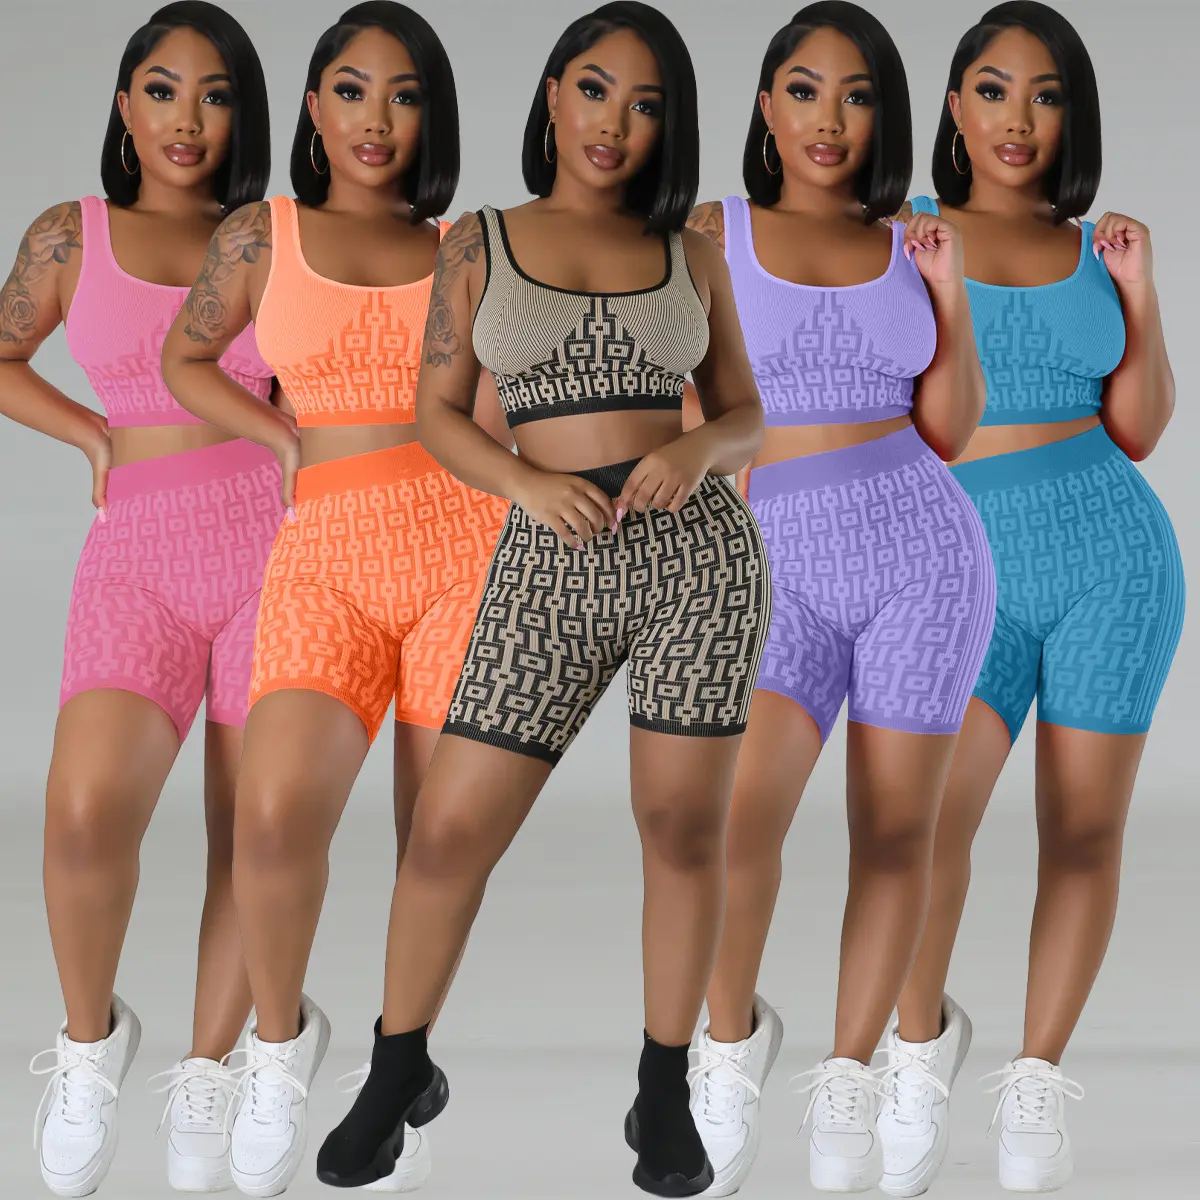 GX2306 new ladies sexy street wear tracksuit sleeveless crop top and bike shorts women 2 piece set summer casual outfit